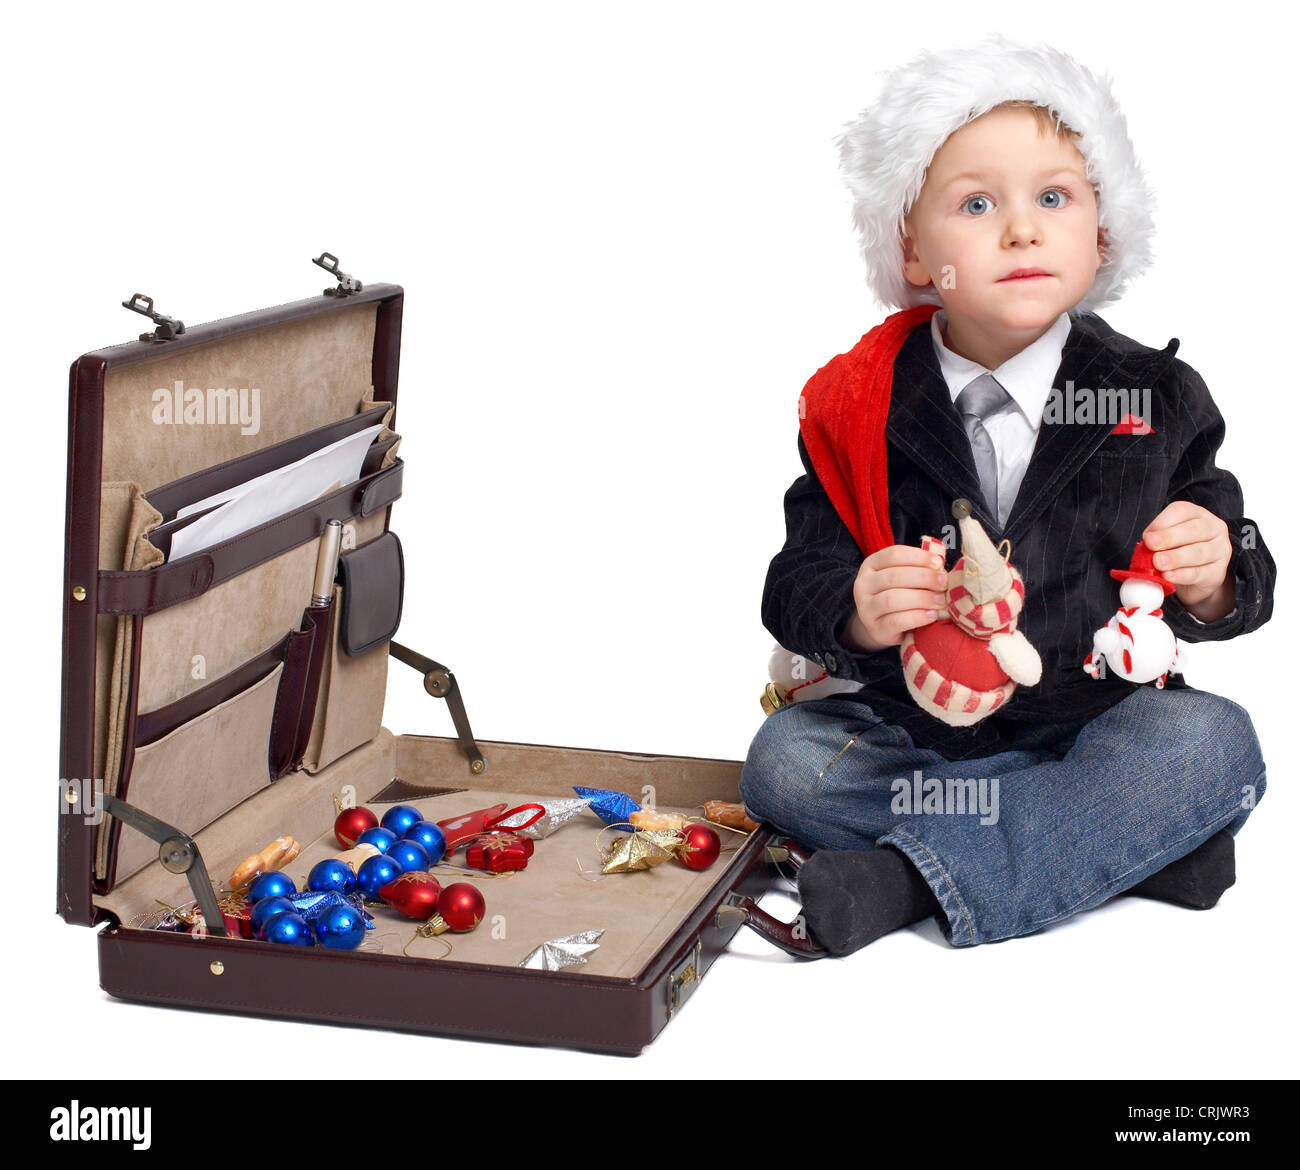 young boy with Santa cap sitting in front of a suitcase with Christmas accessories Stock Photo